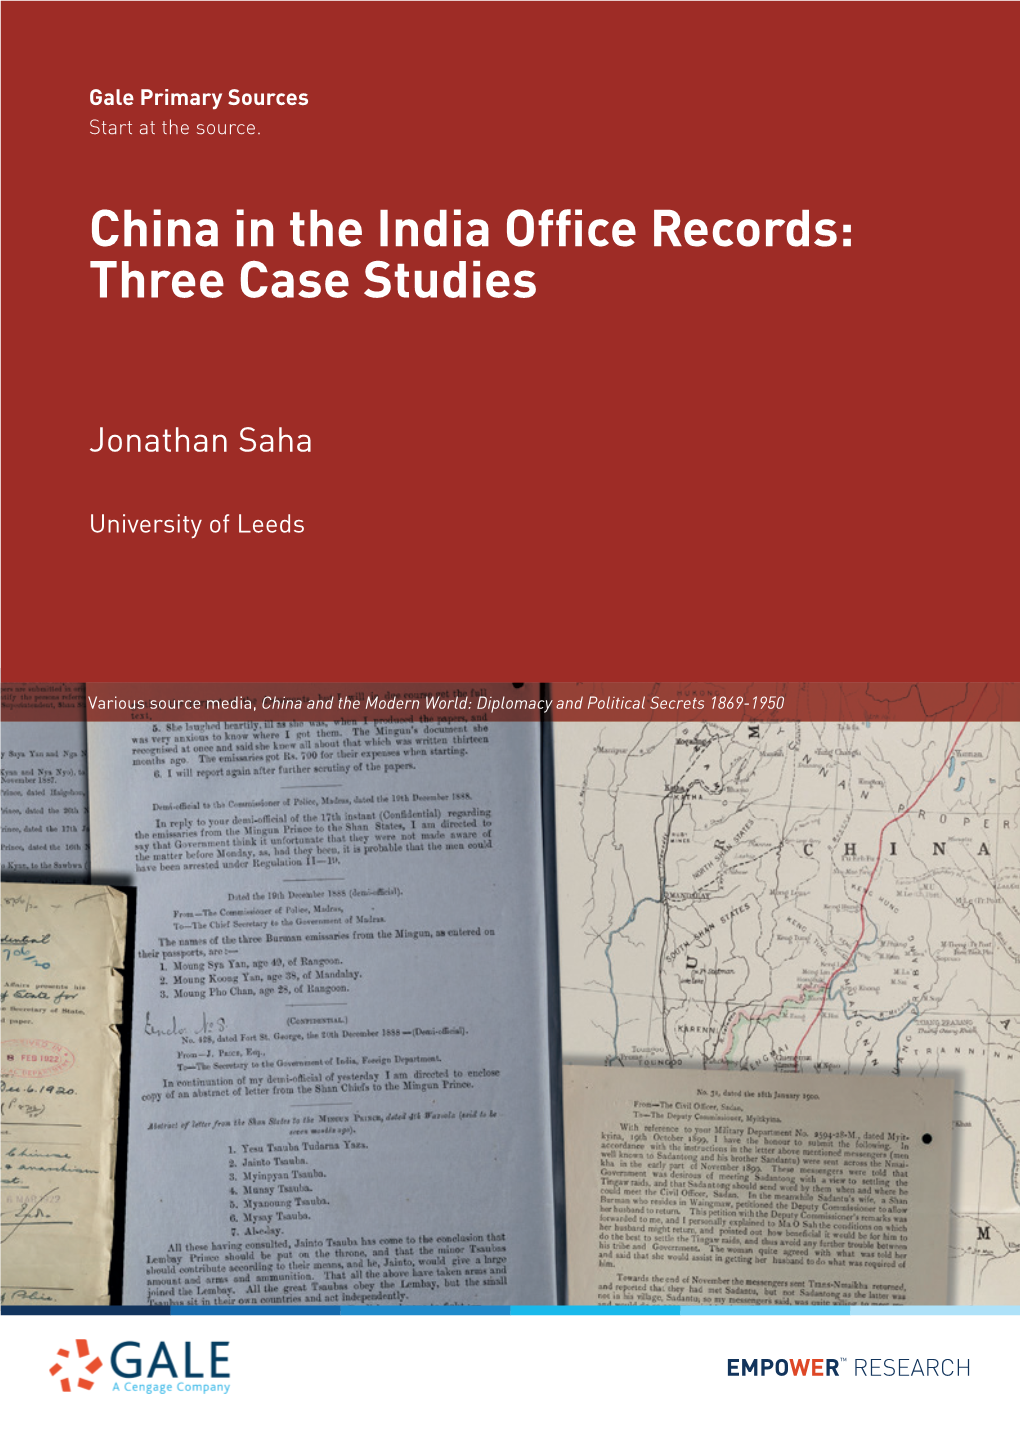 China in the India Office Records: Three Case Studies